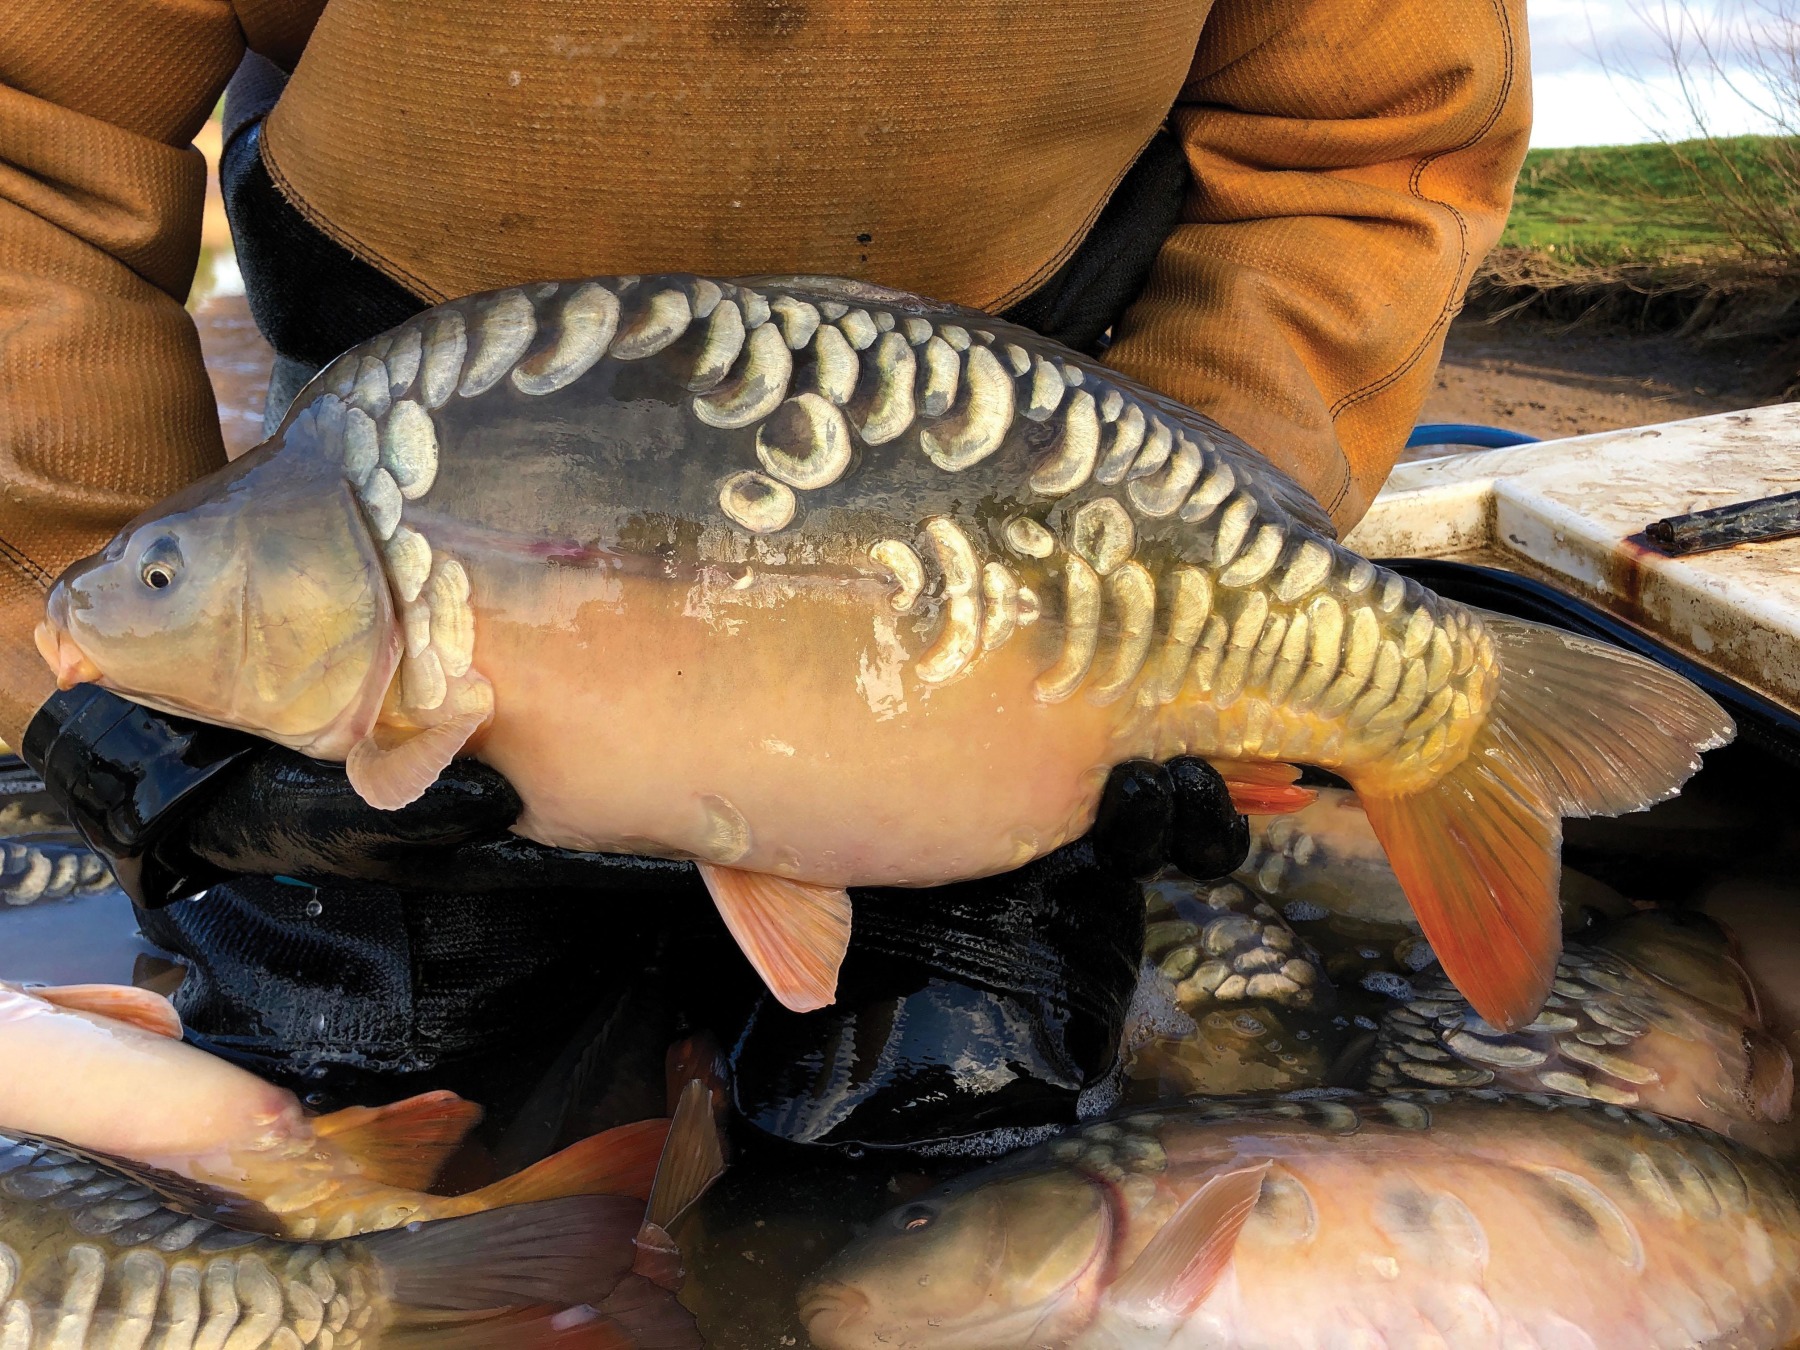 These were referred to as mirror carp! 